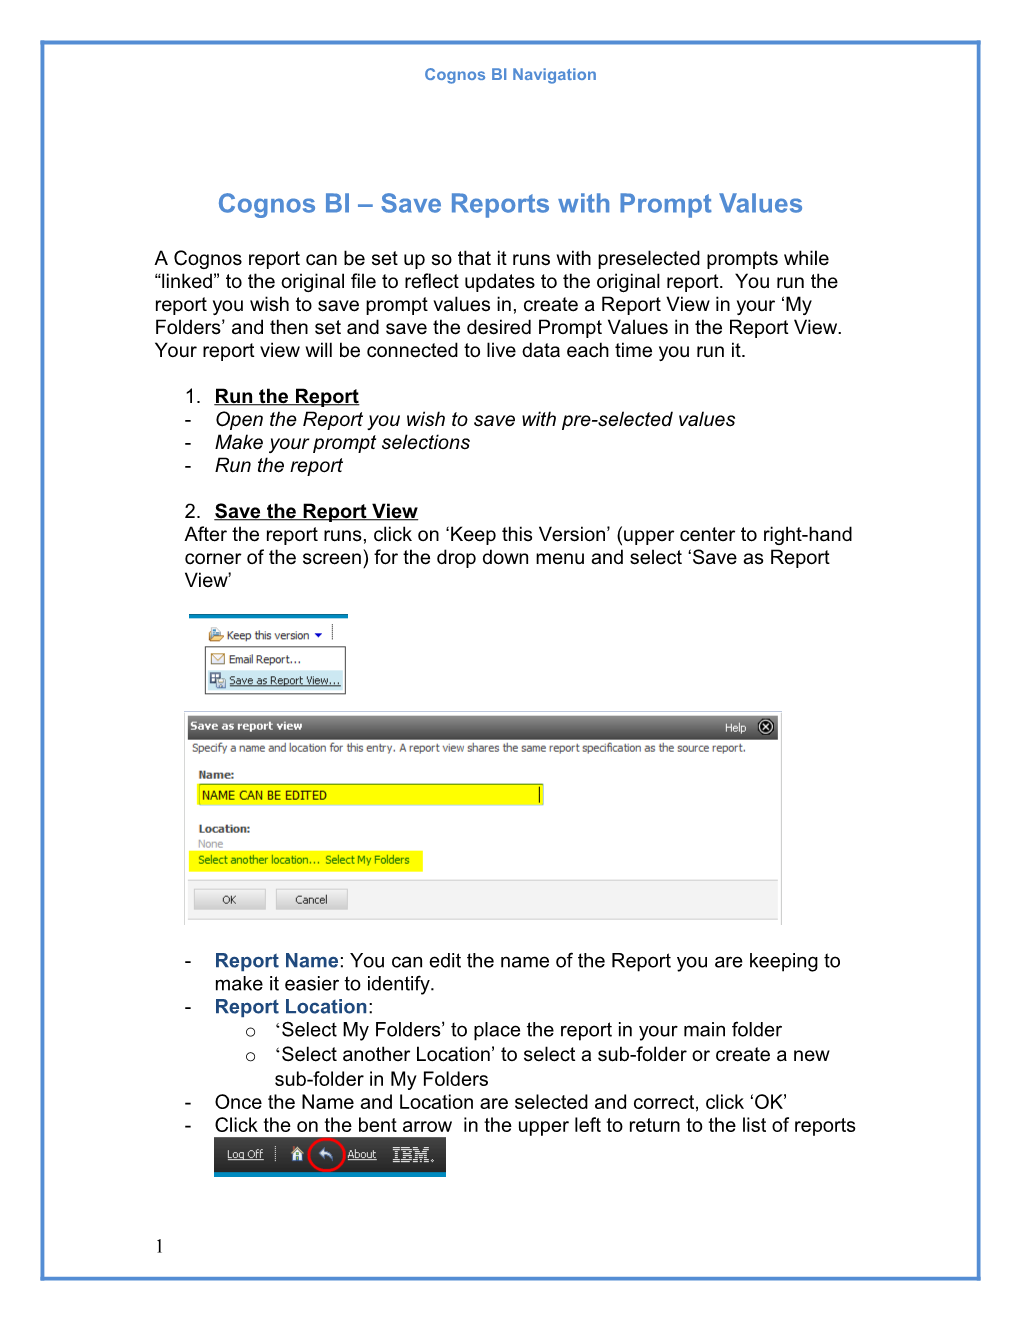 Cognos BI Save Reports with Prompt Values